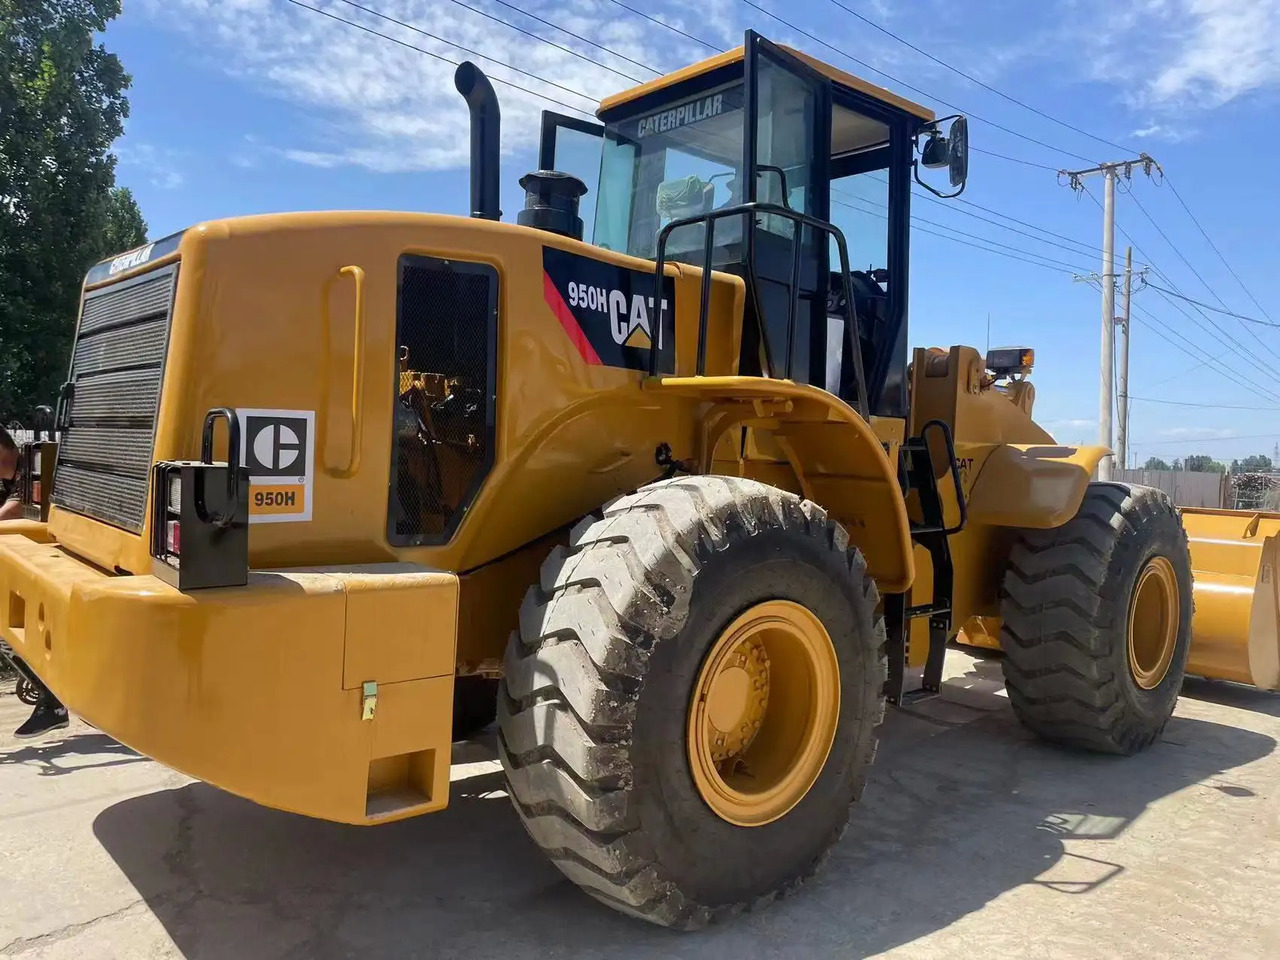 Caterpillar 950H wheel loader used heavy equipment cheap price 950H 966H 950GC for sale - Wheel loader: picture 4